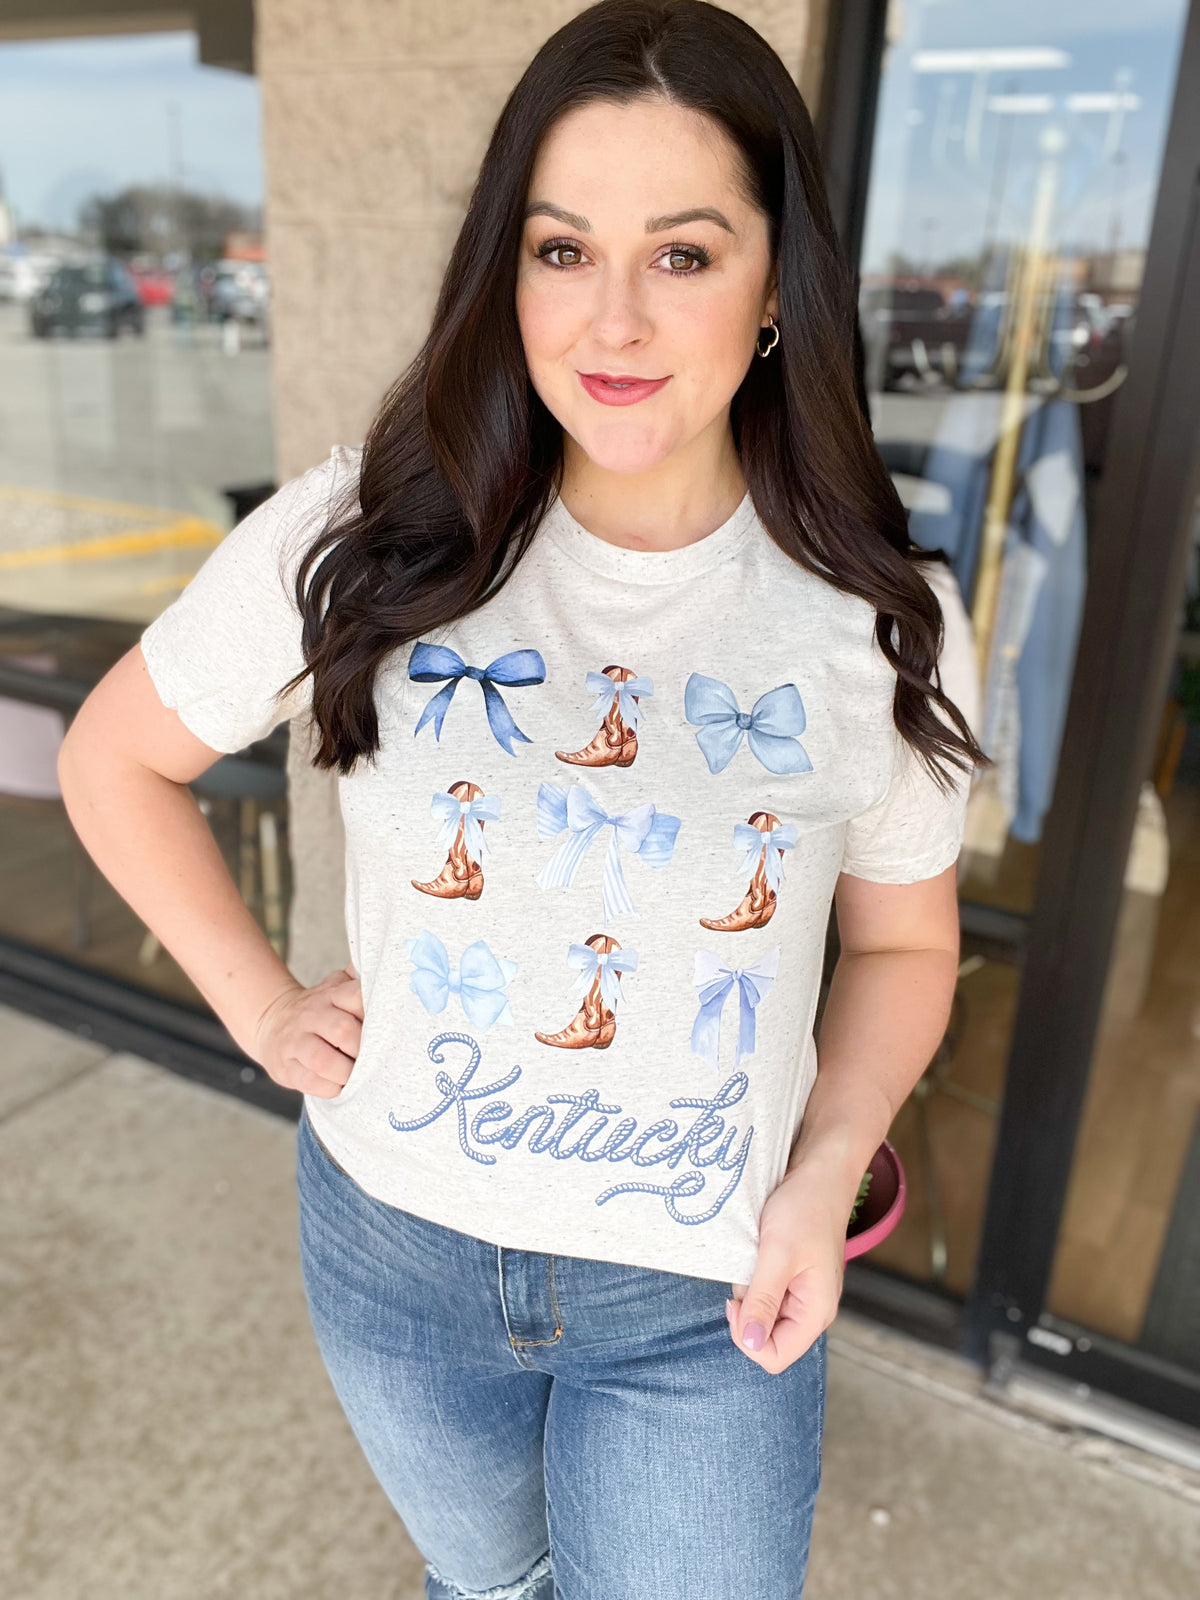 Boots, Bows, & Kentucky Graphic Tee | Build Your Own Tshirt Bar